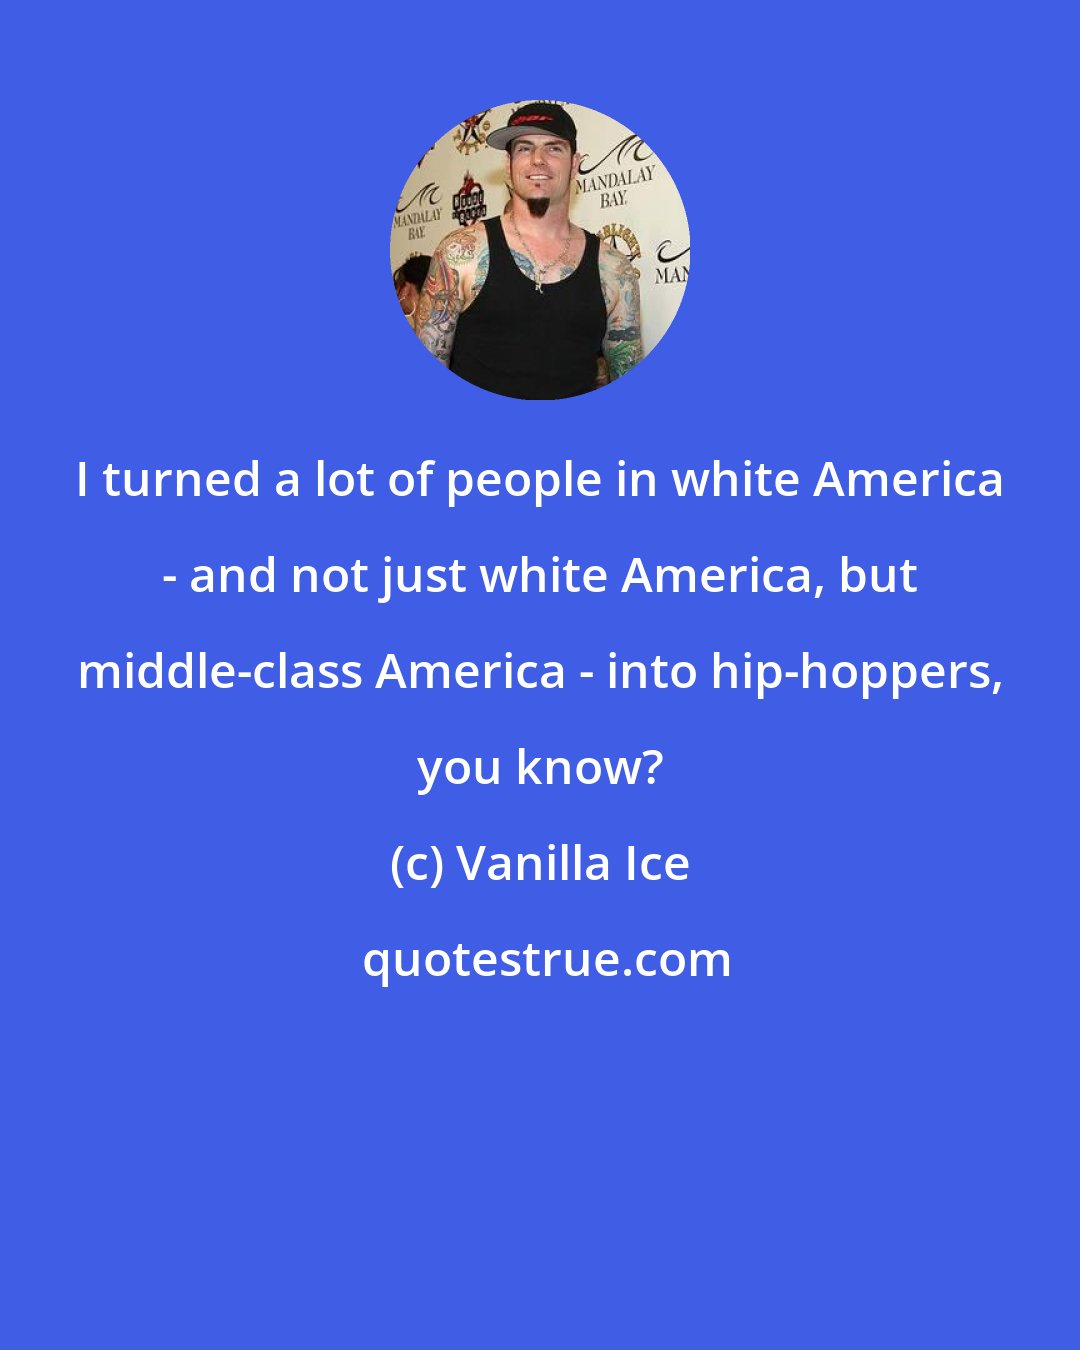 Vanilla Ice: I turned a lot of people in white America - and not just white America, but middle-class America - into hip-hoppers, you know?